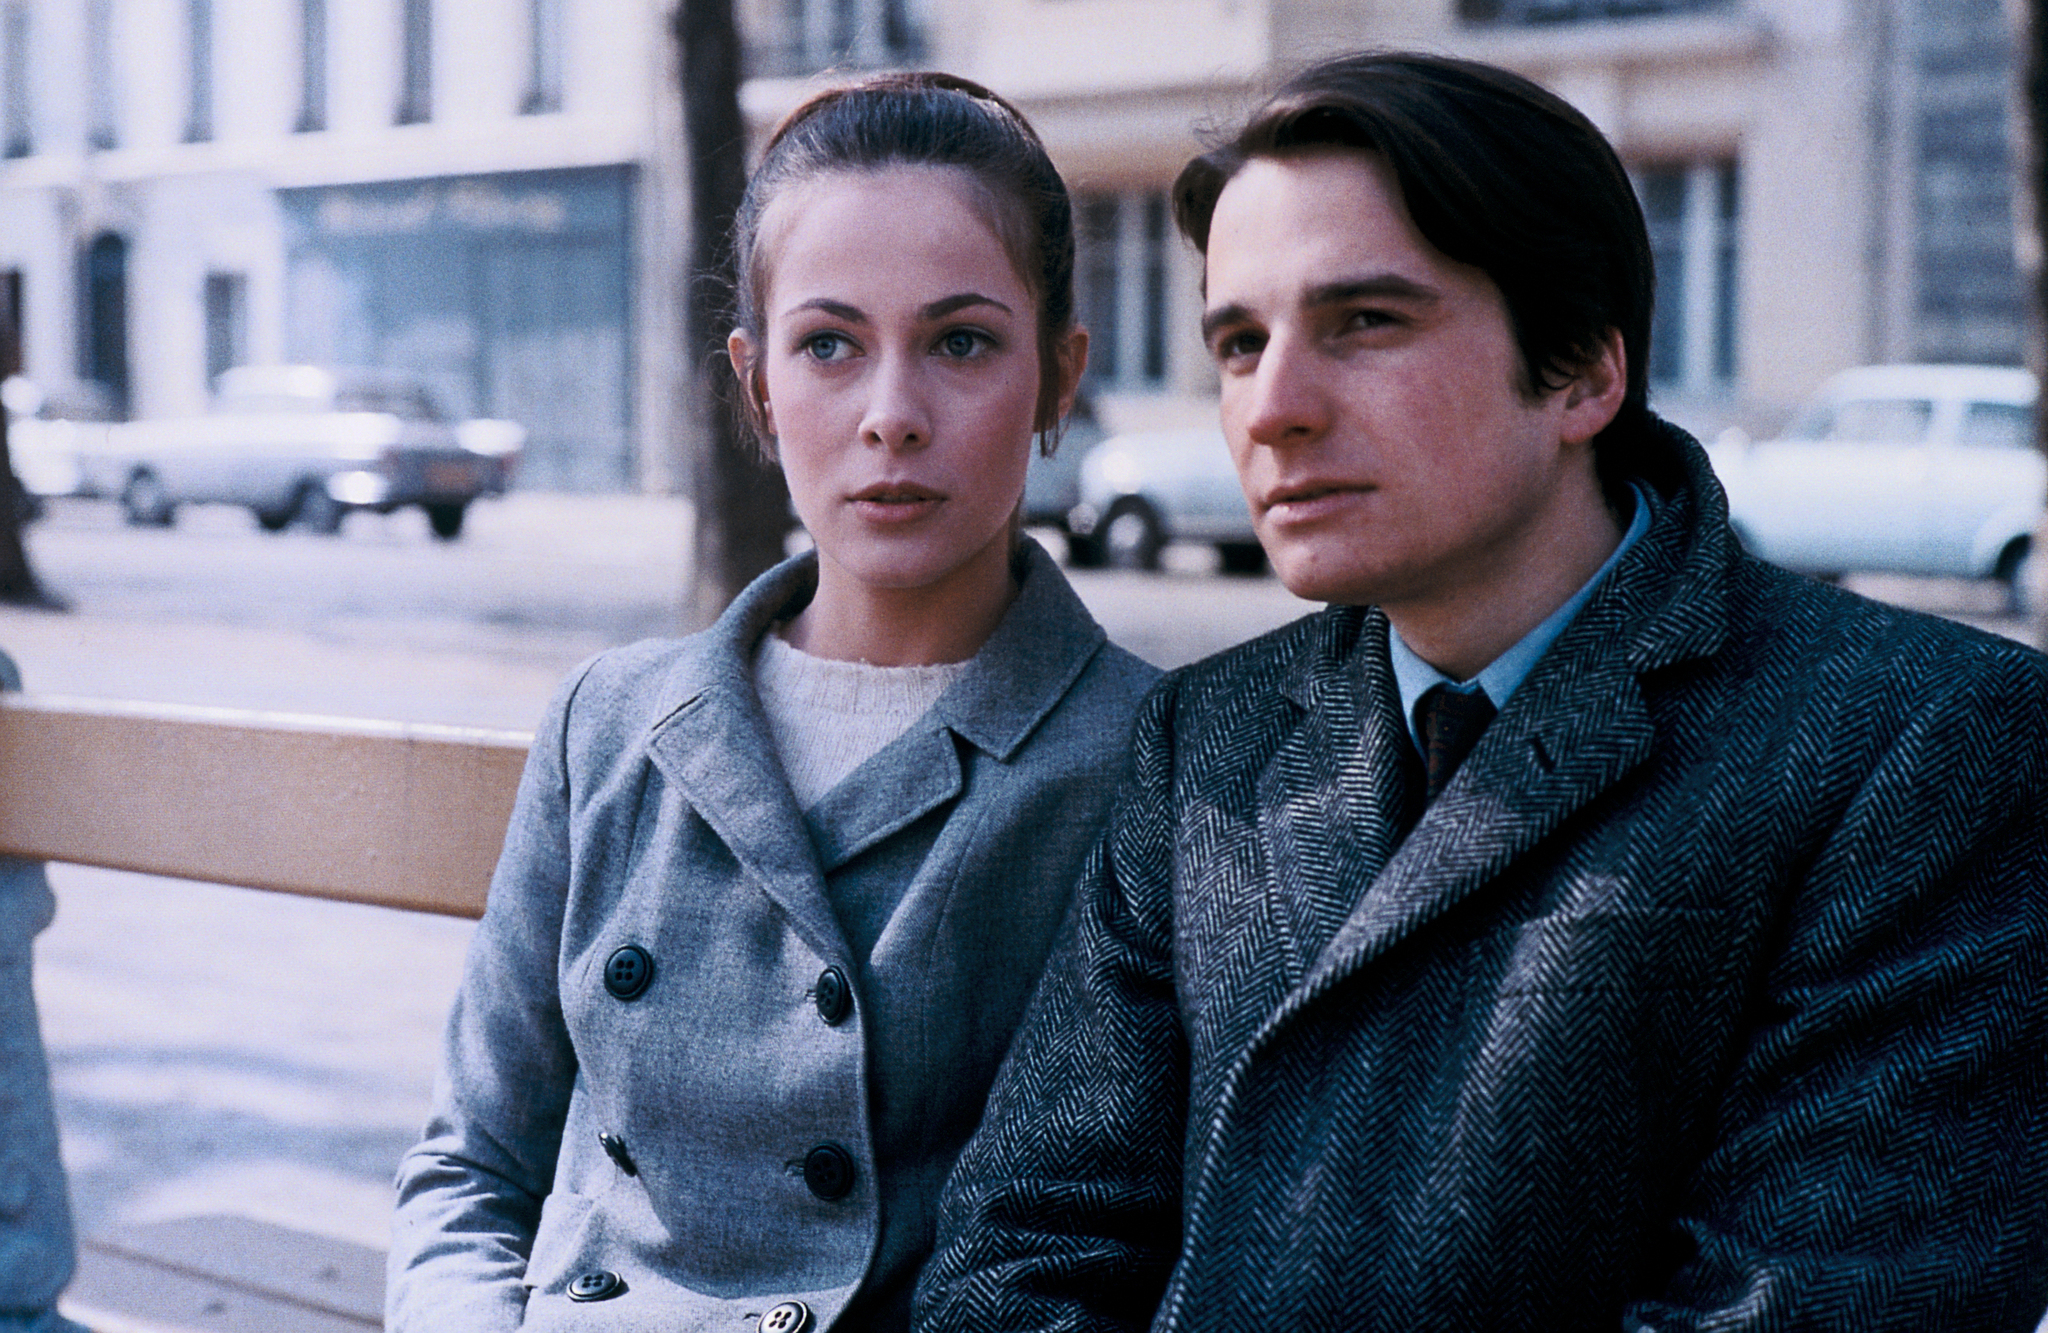 Still of Claude Jade and Jean-Pierre Léaud in Baisers volés (1968)